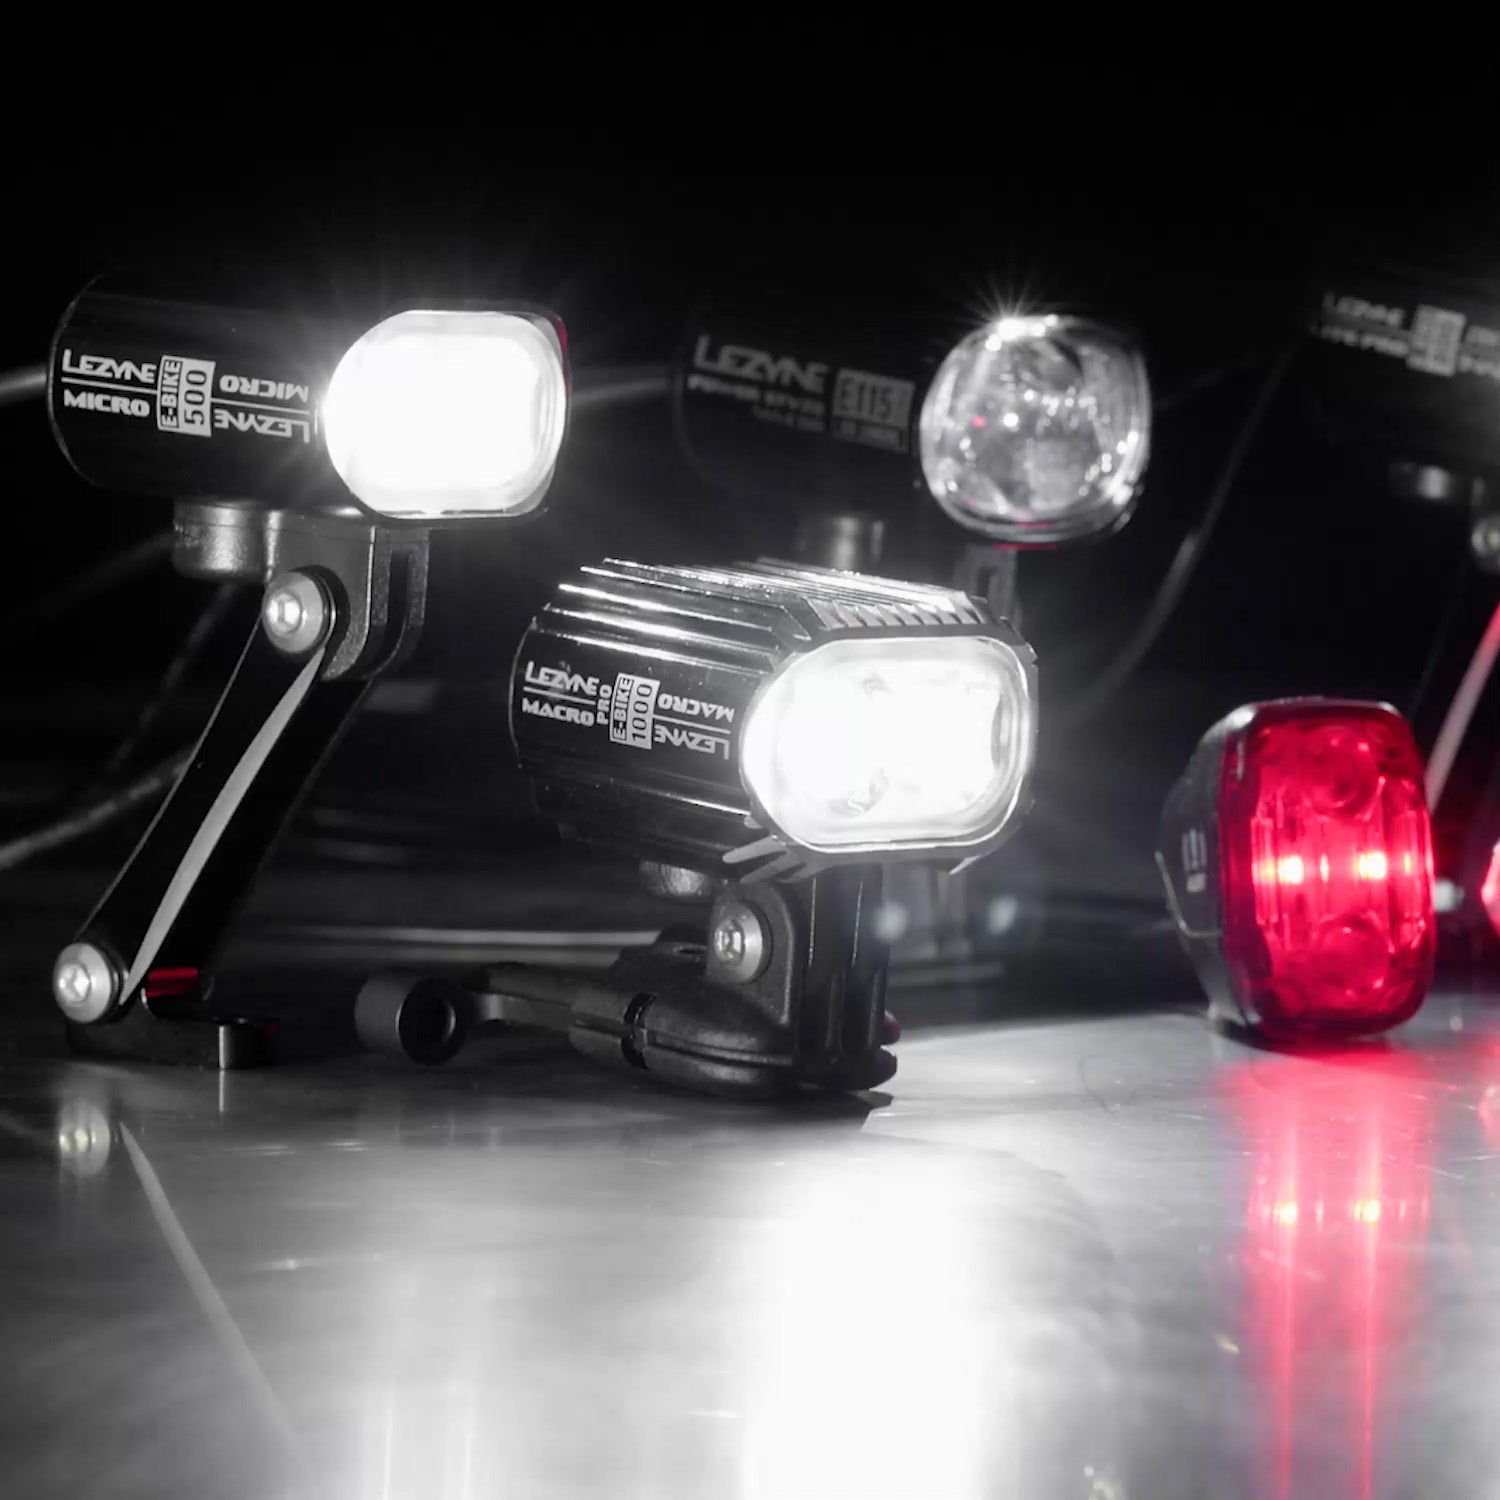 Several lights on a surface. Lezyne Macro E-BIKE 500 can be seen printed on the side of one of them.